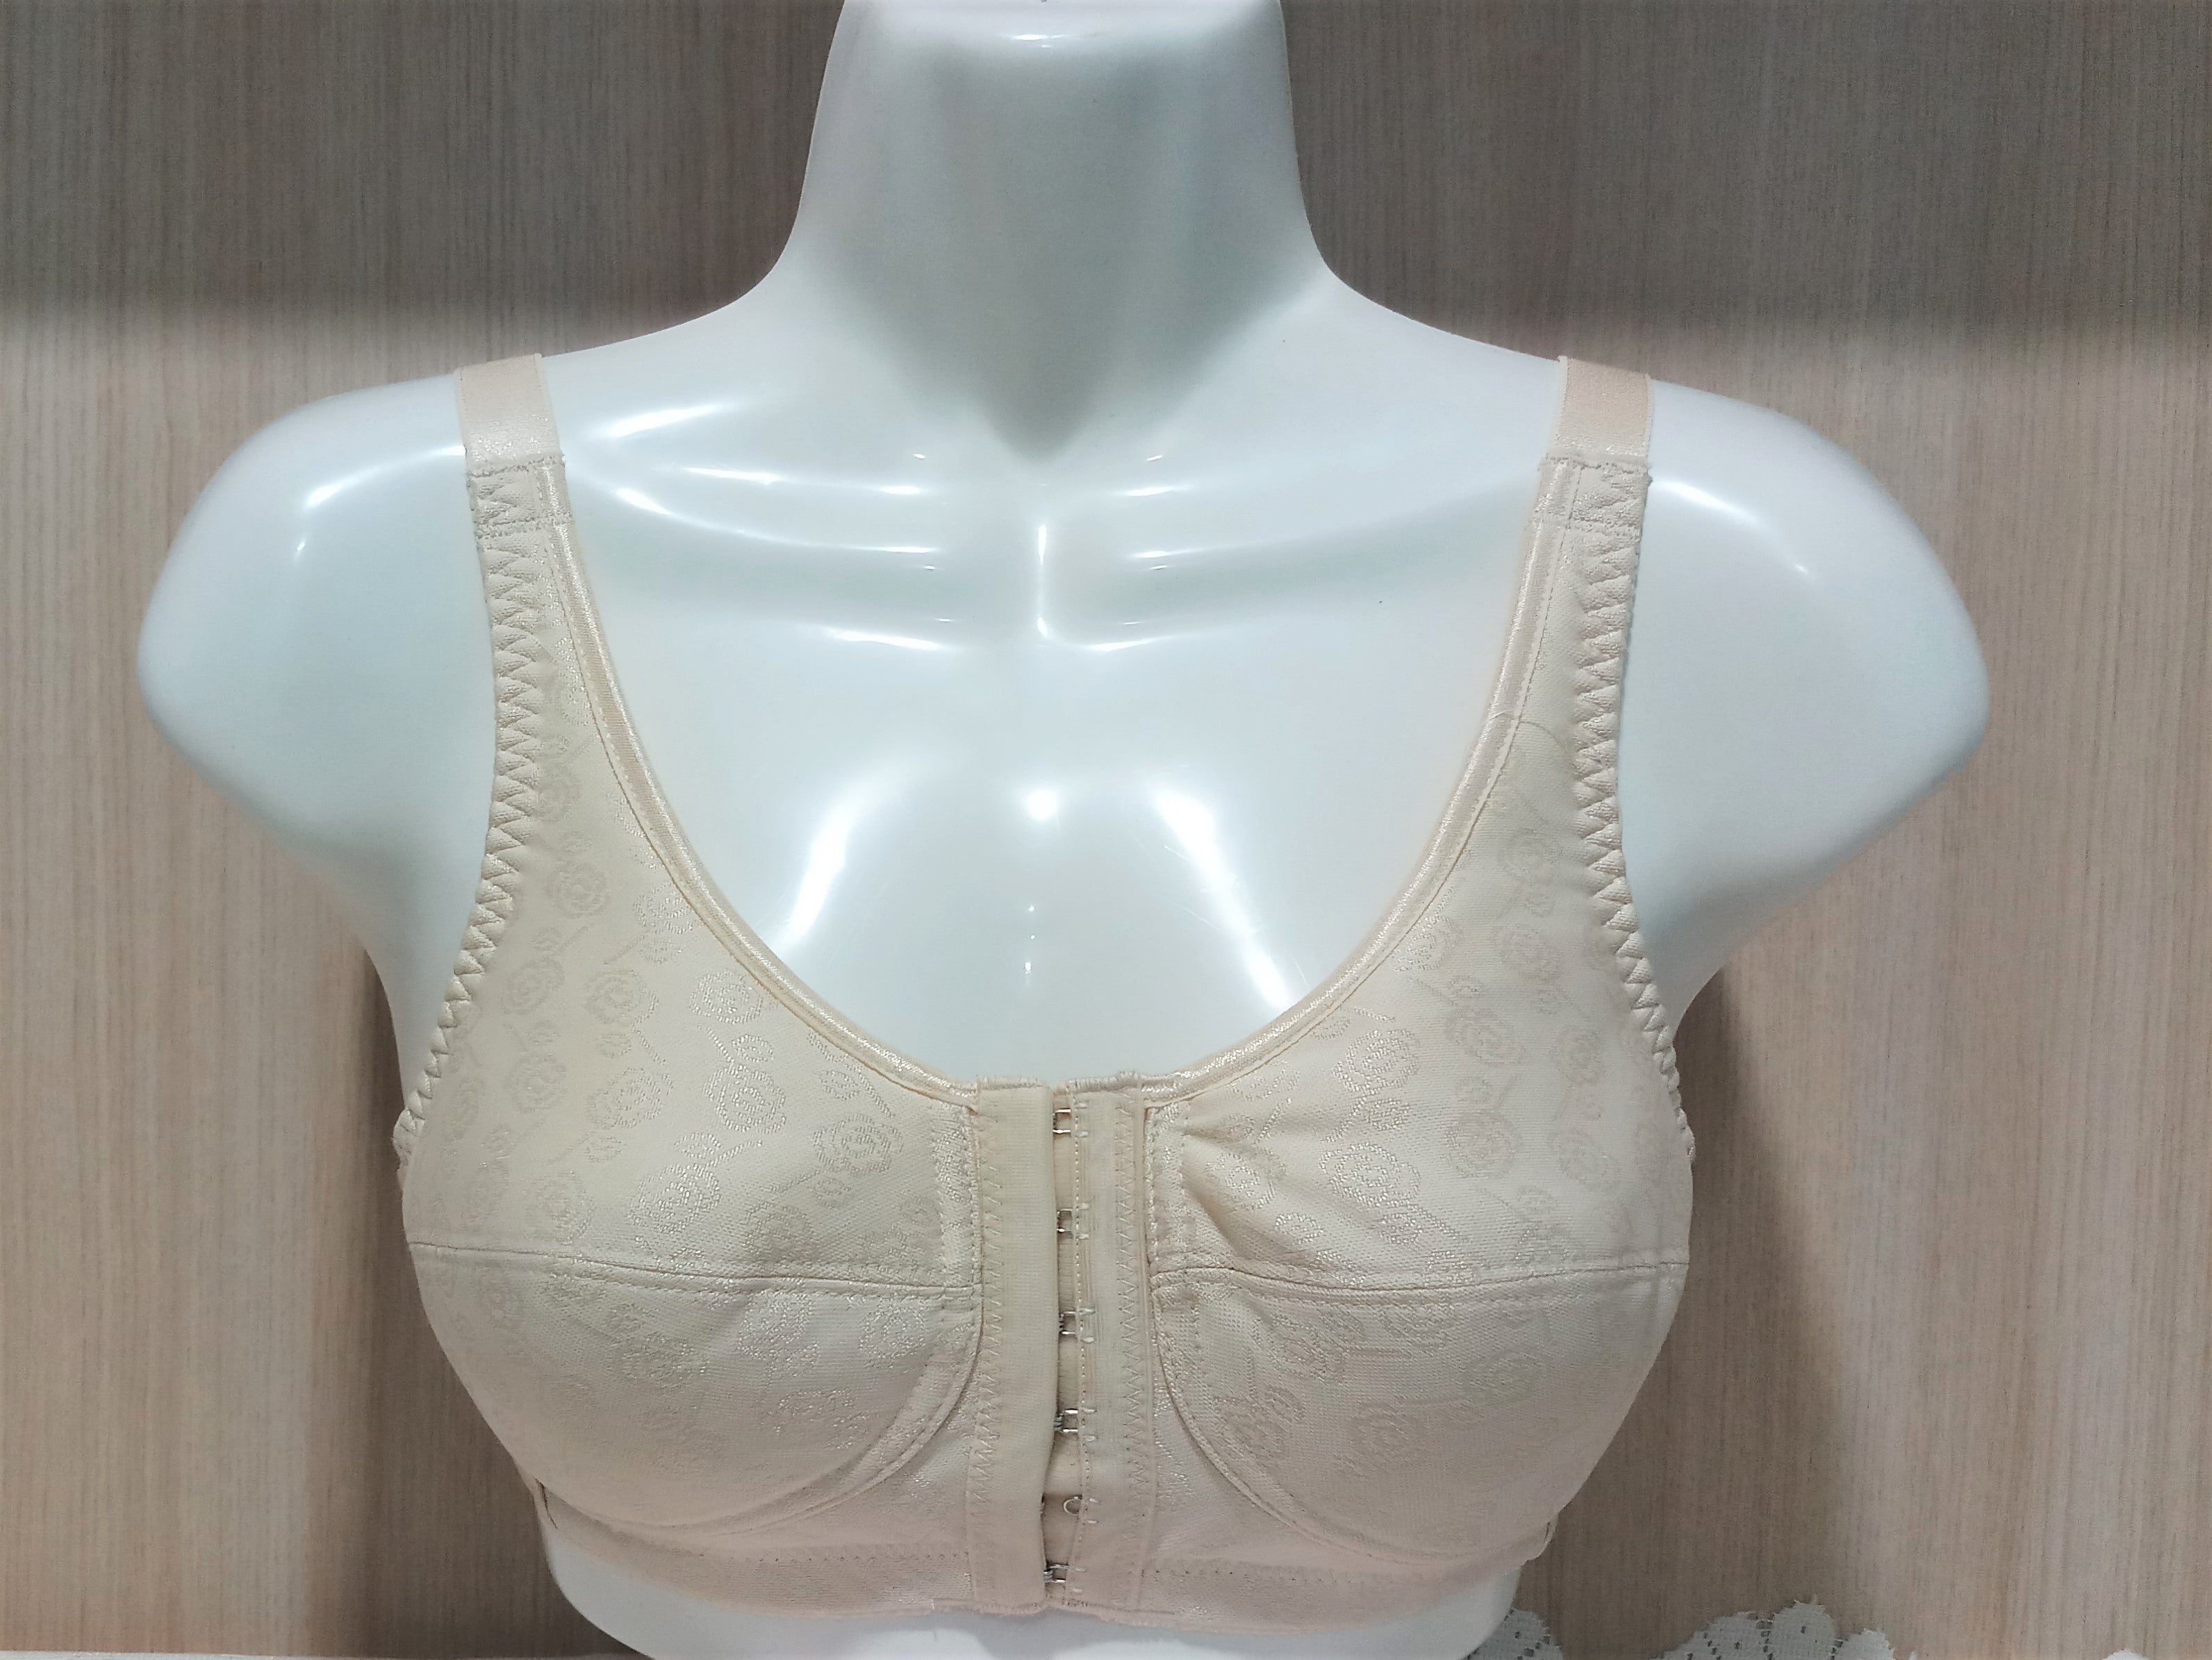 ABC Rose Contour Mastectomy Bra in Rose Effortless Comfort and Support